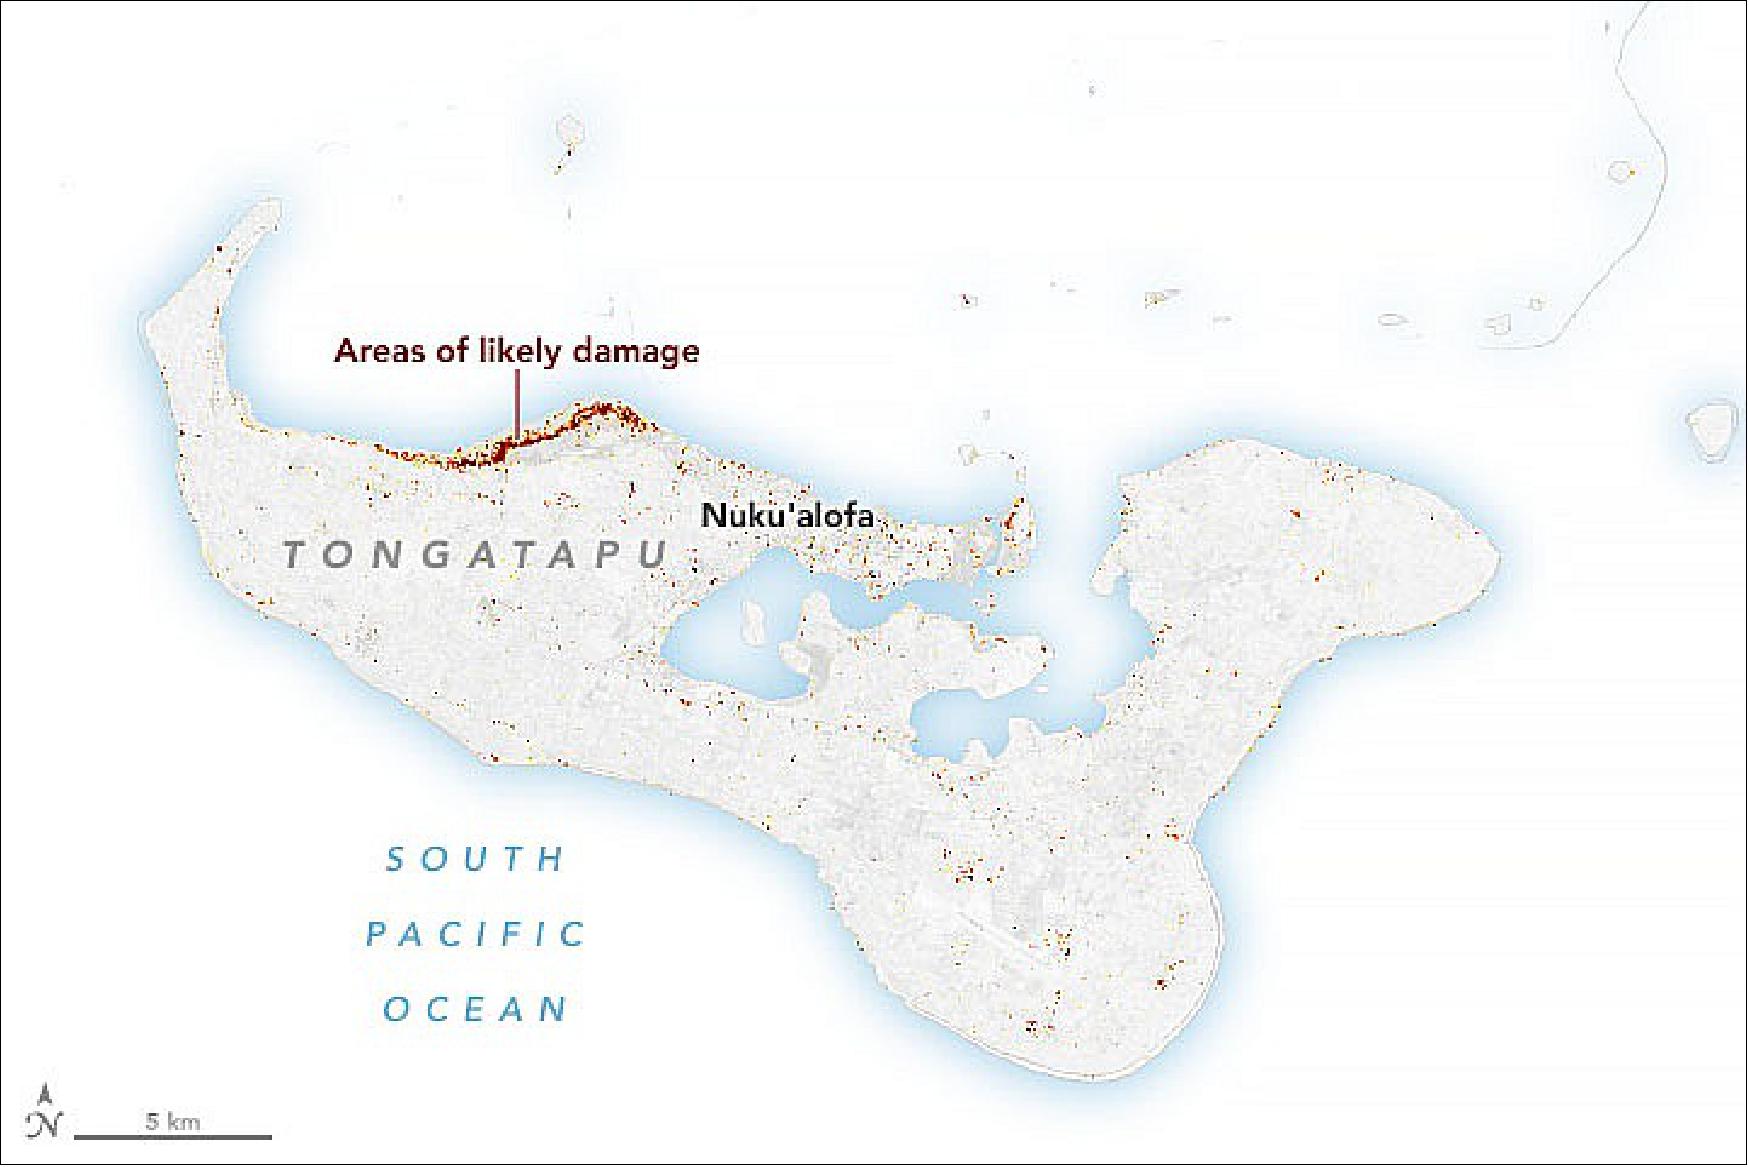 Figure 85: This damage proxy map shows areas on Tongatapu that were likely damaged by the eruption and tsunami. Dark red pixels represent the most severe damage, while orange and yellow areas are moderately or partially damaged. Each colored pixel represents an area of 30 meters by 30 meters. Researchers from the The Earth Observatory of Singapore - Remote Sensing Lab (EOS-RS) made the maps by comparing a post-eruption satellite radar image from January 22, 2022, with pre-eruption images from March 2019 and March 2020 (image credit: NASA Earth Observatory)